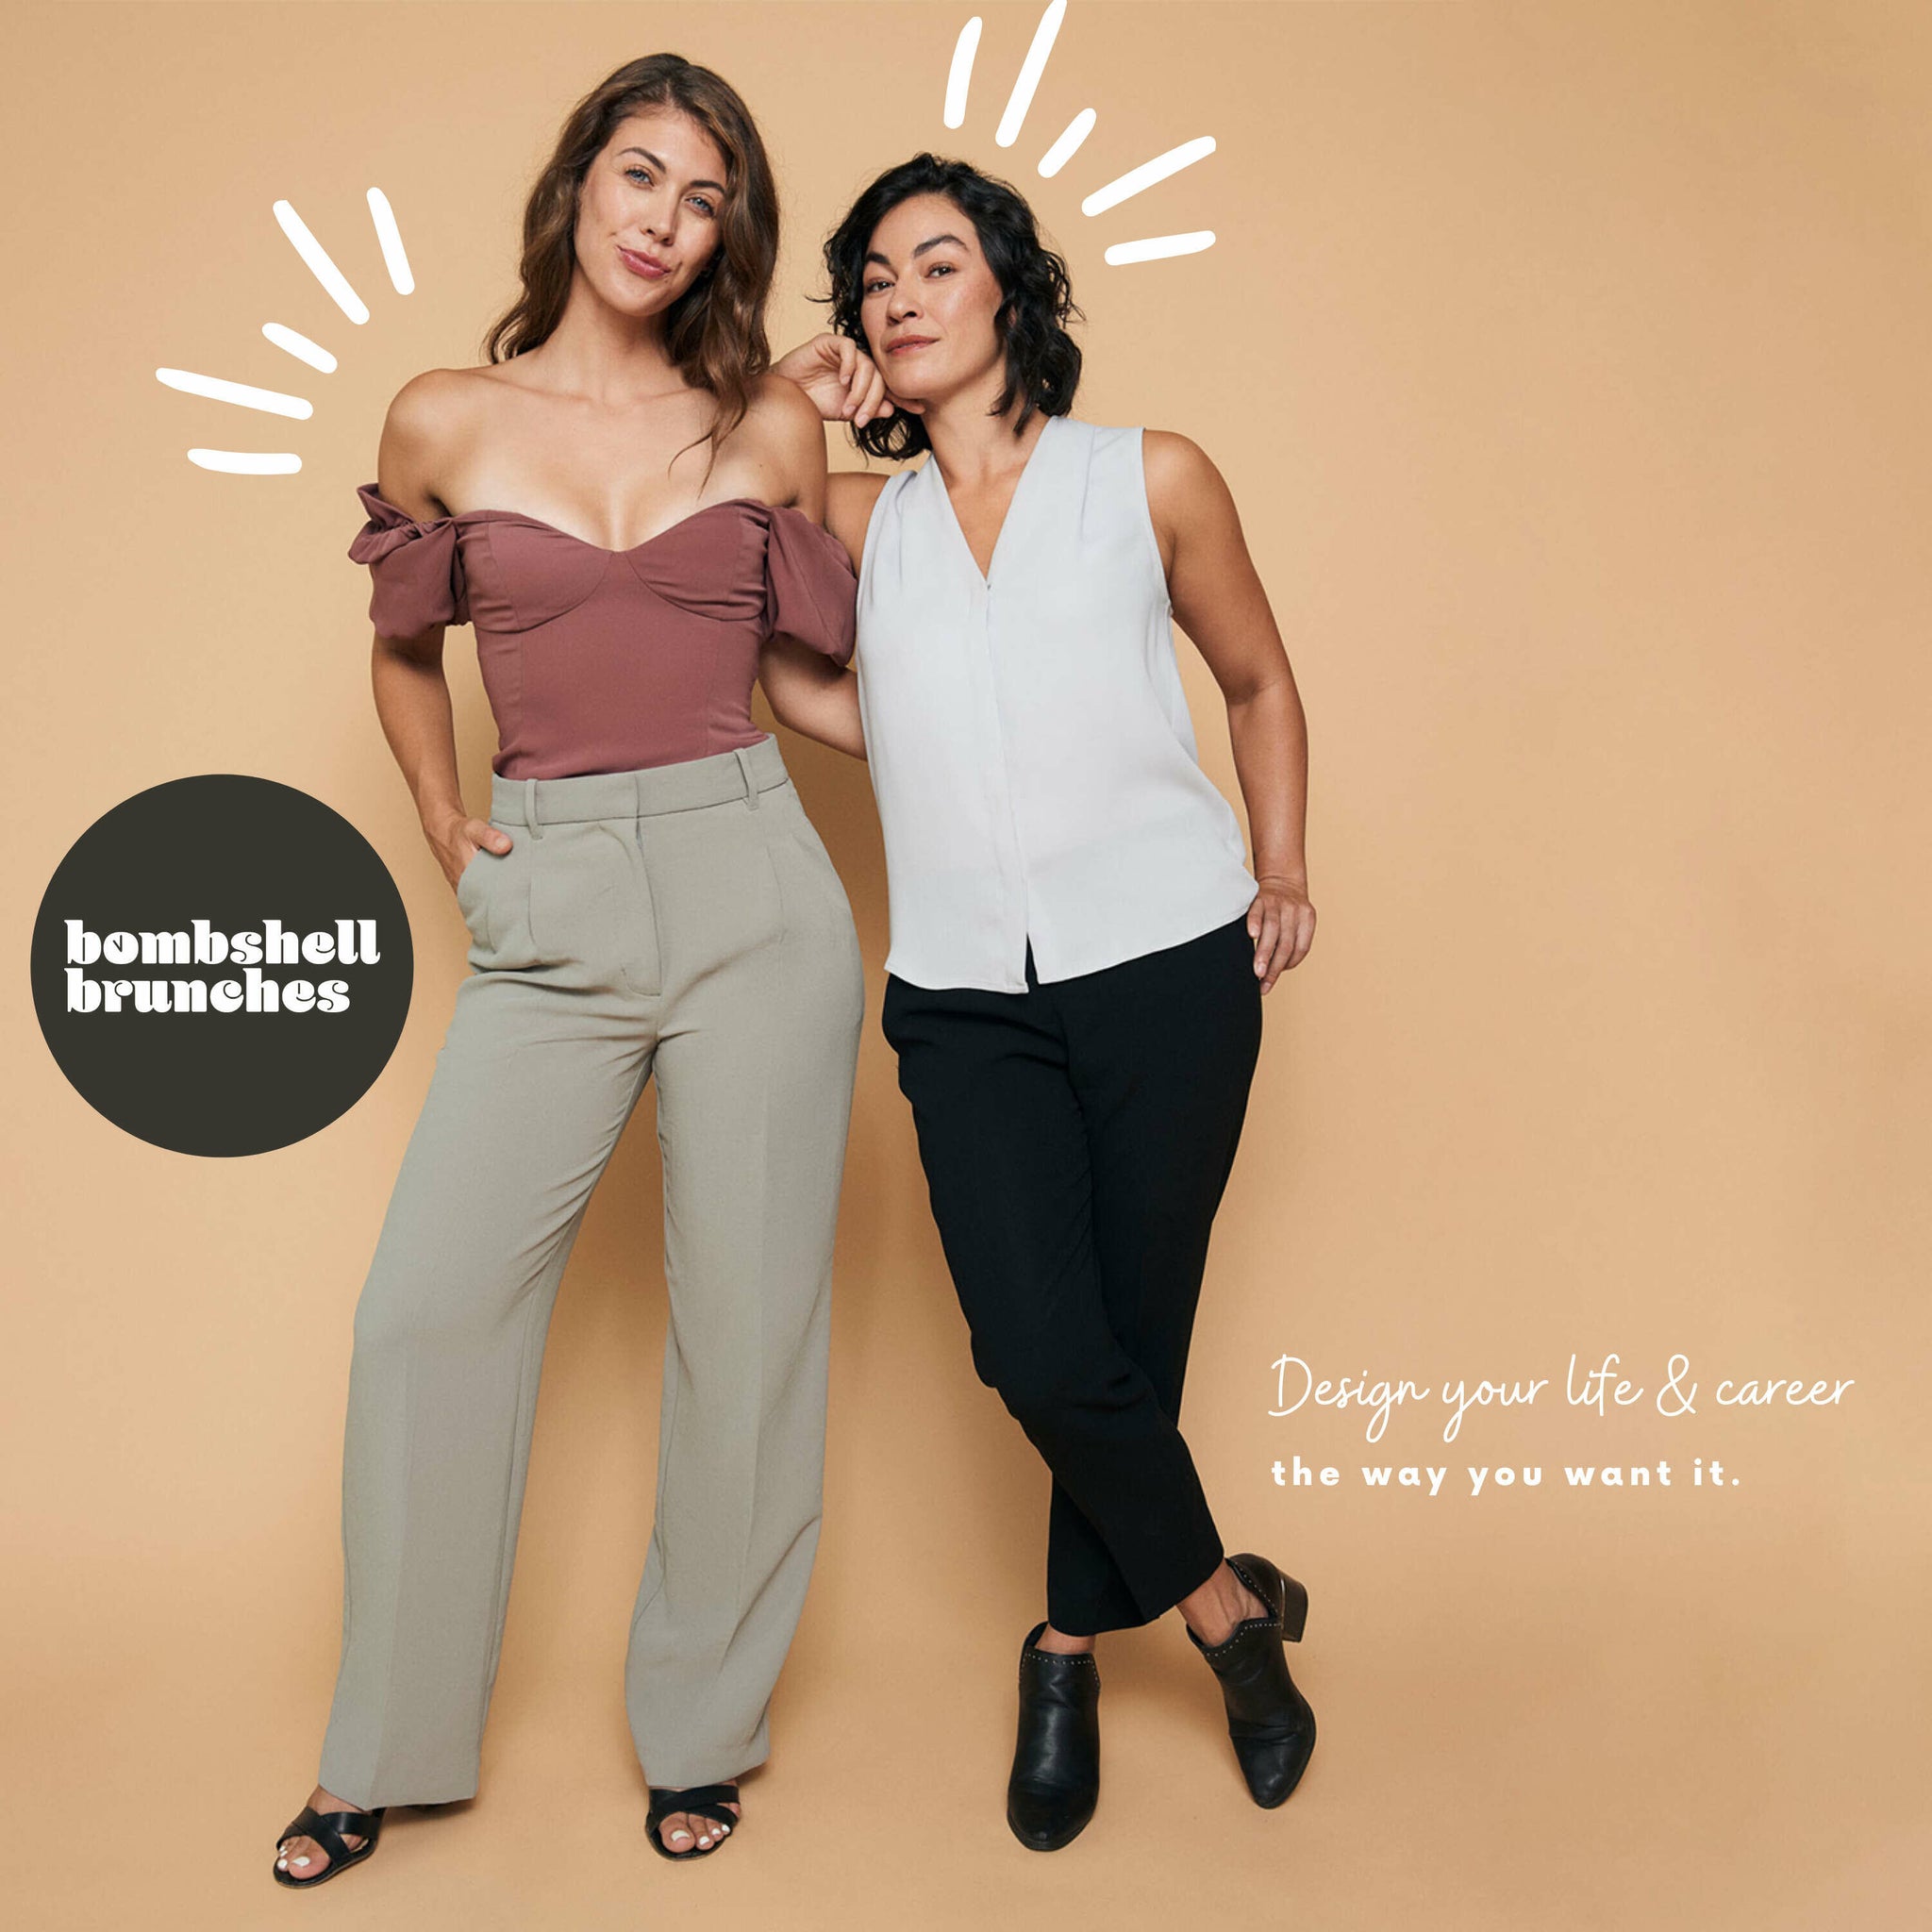 Loba on Bombshell Brunches Podcast